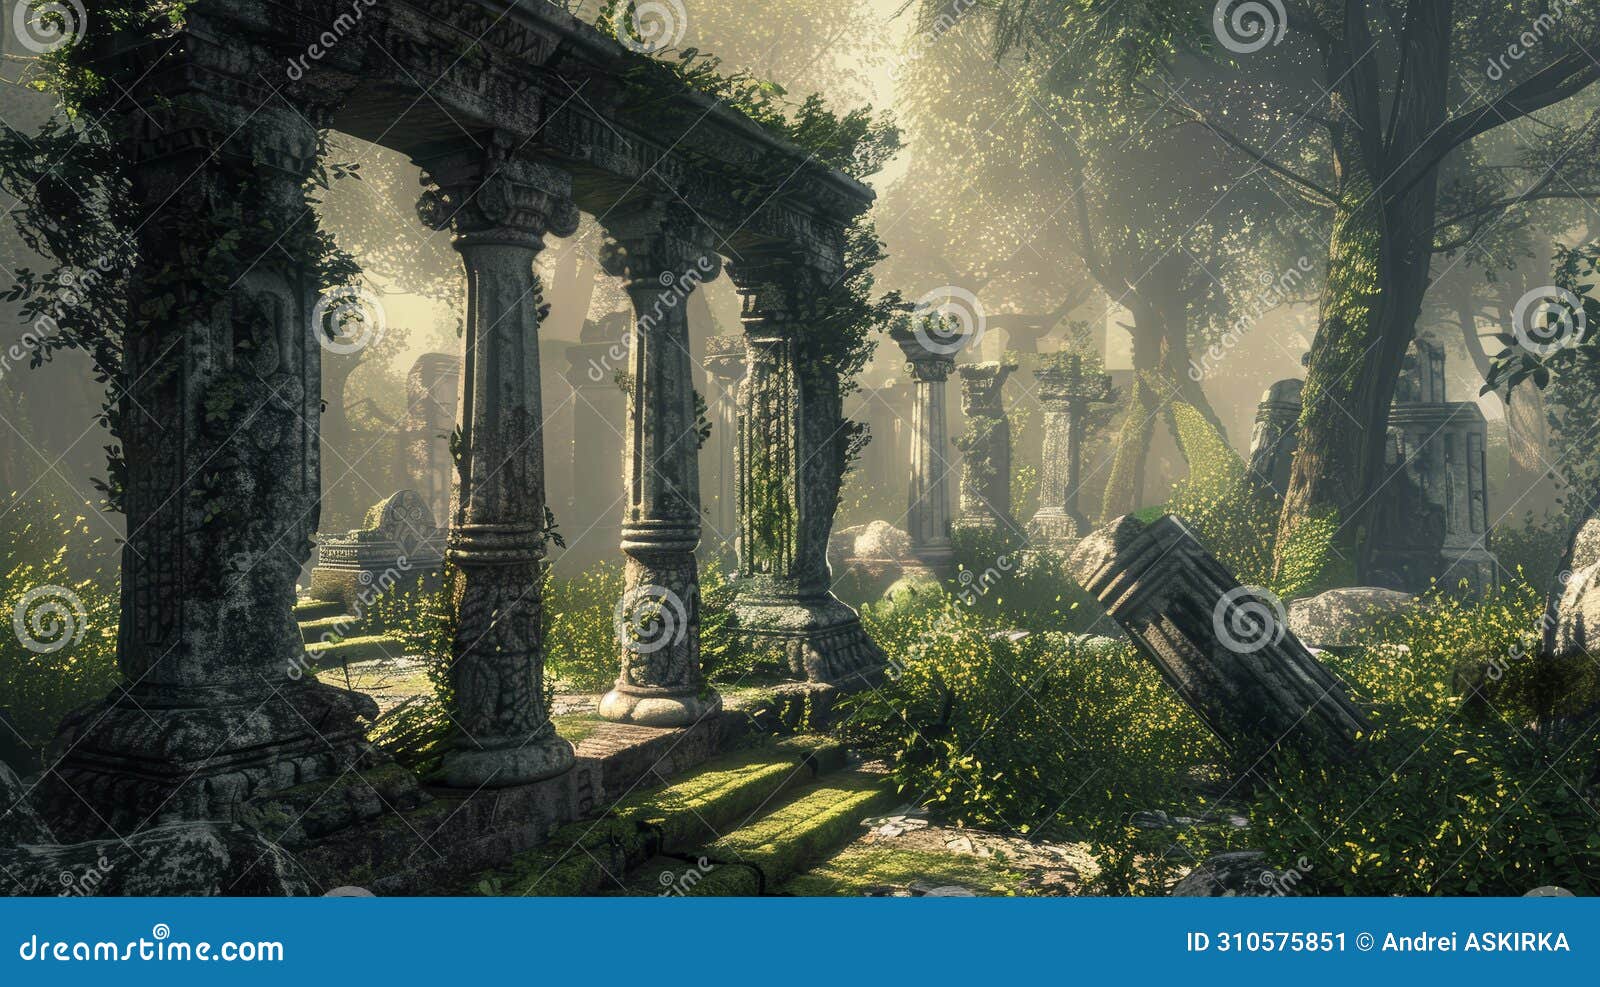 sunlit forest ruins covered in moss. peaceful ancient architecture with nature reclaiming